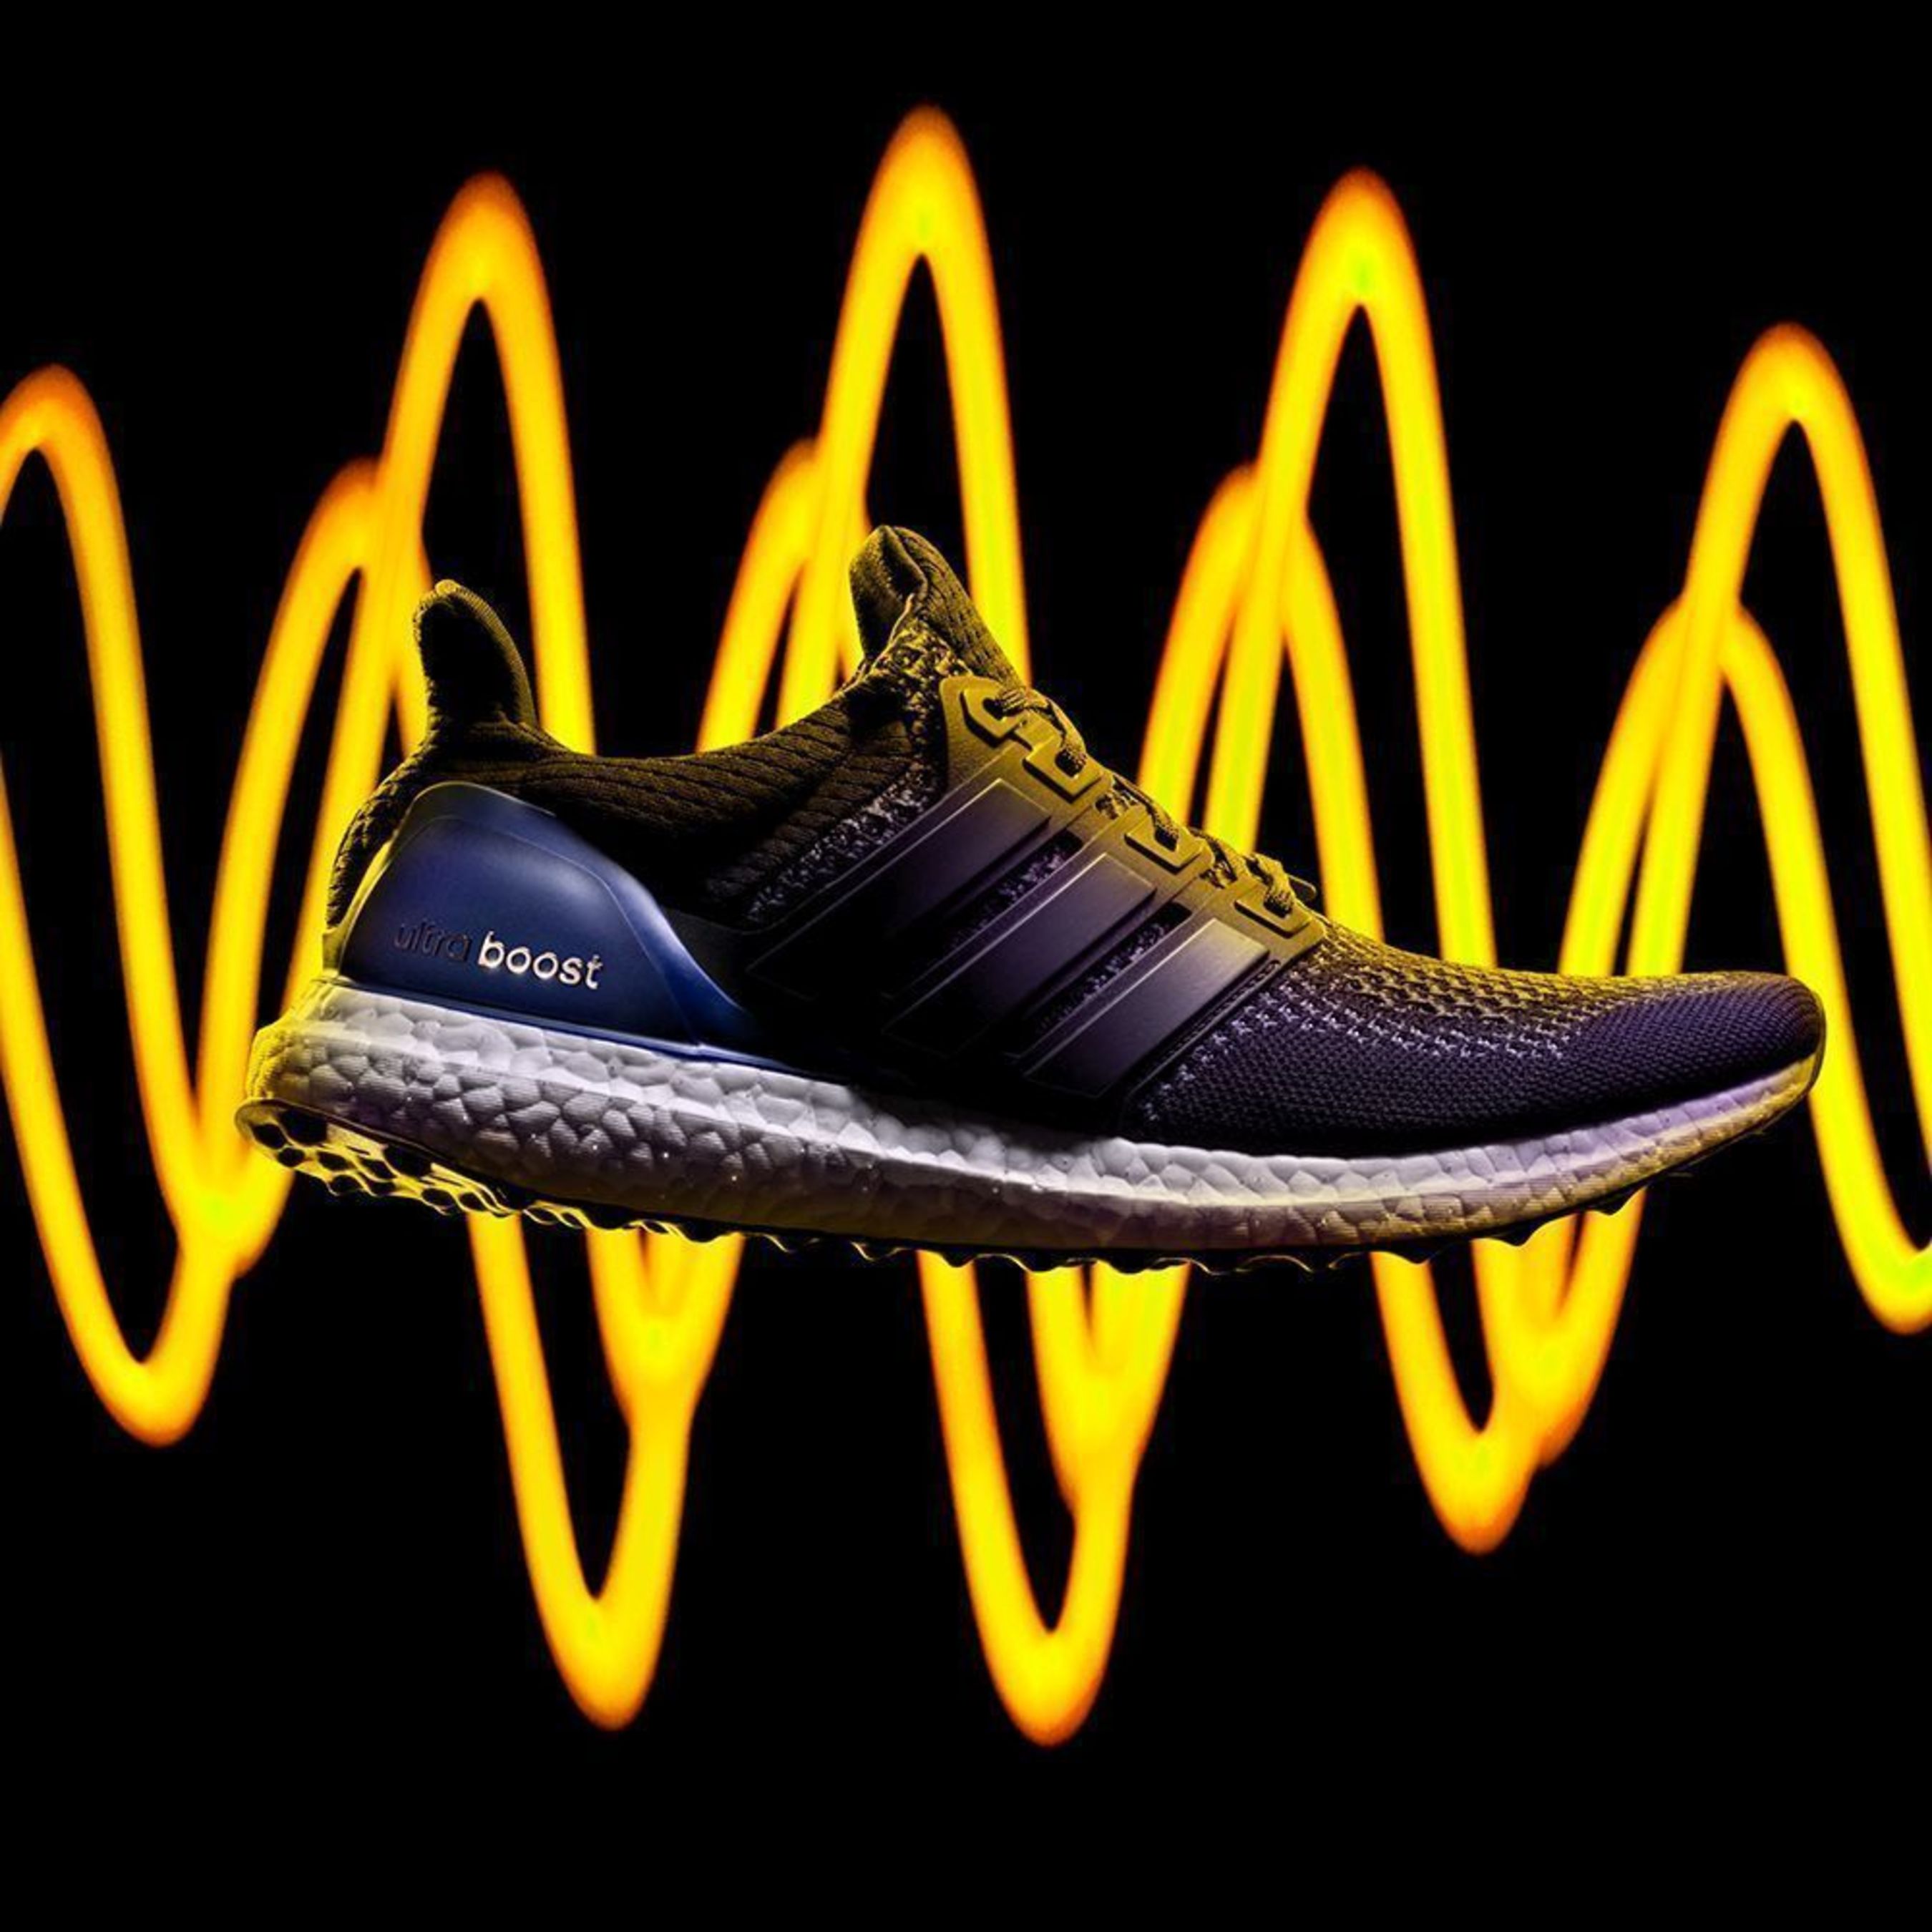 adidas unveils Ultra BOOST, the greatest running shoe ever. Join the revolution #ultraboost (PRNewsFoto/adidas)